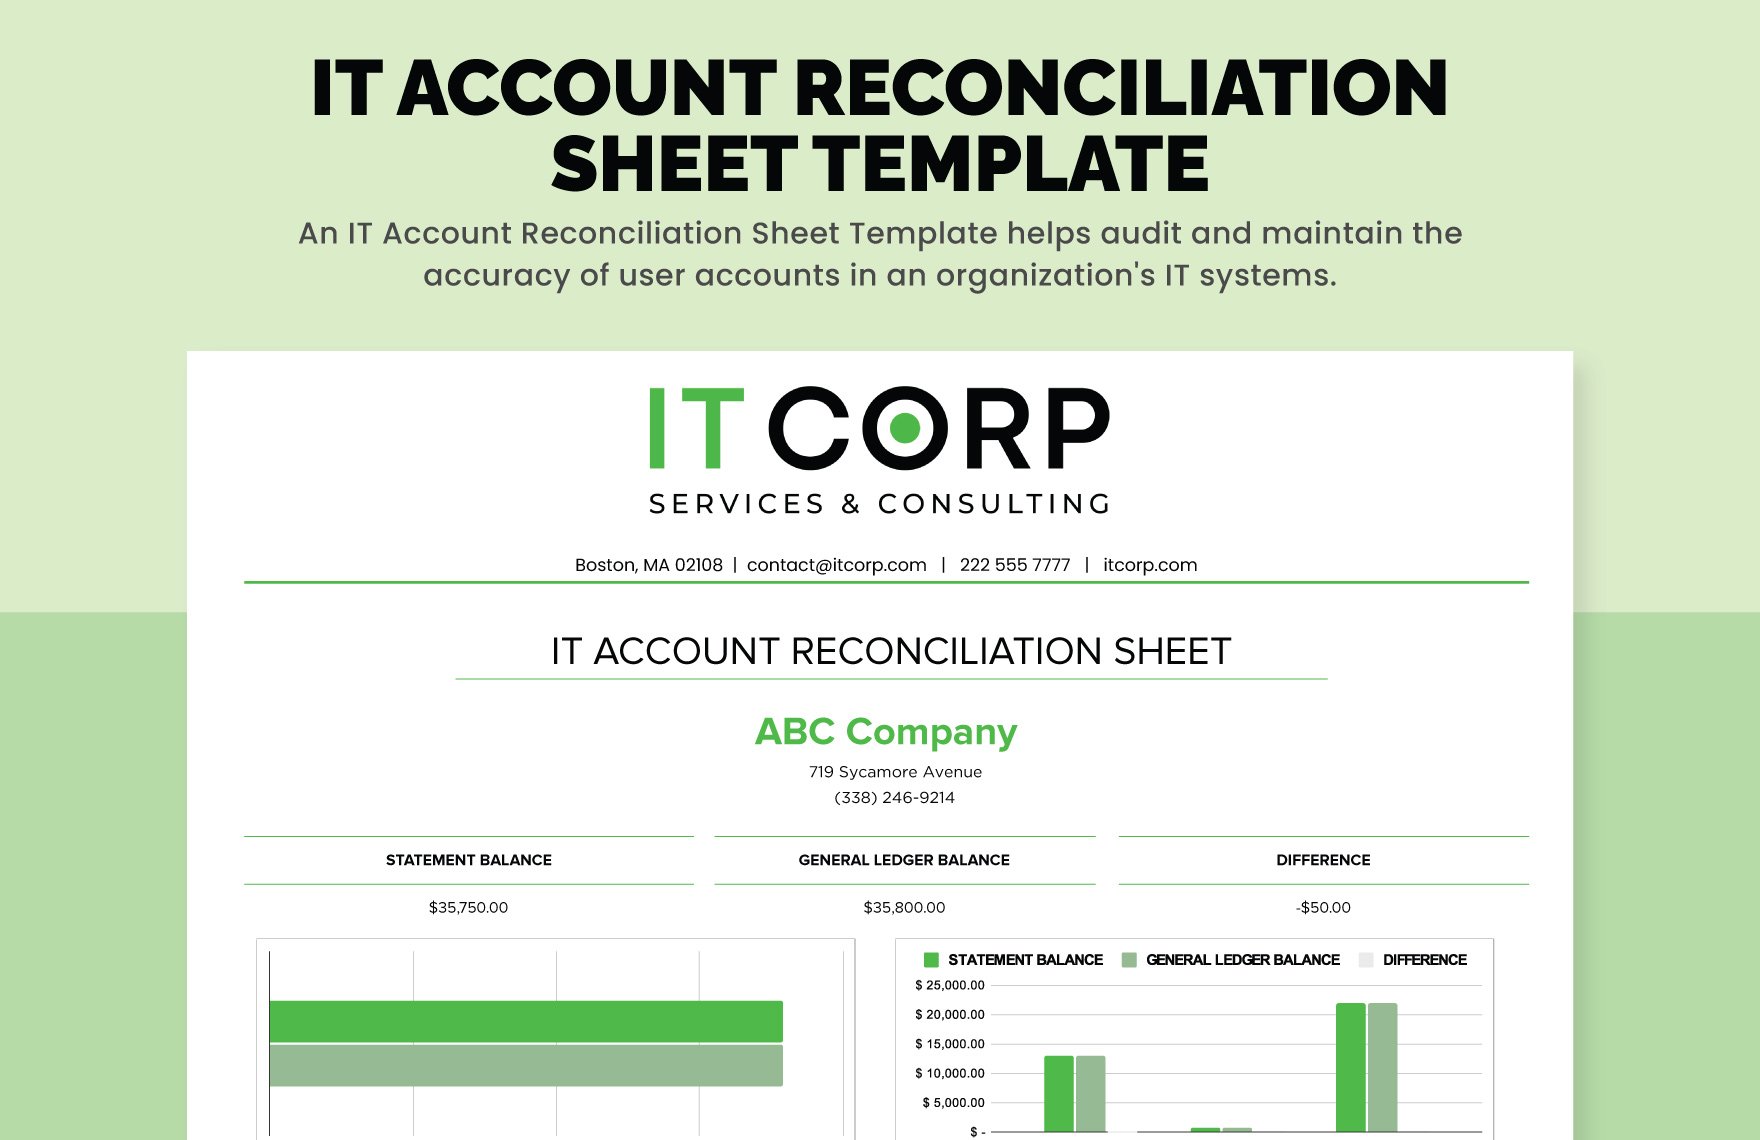 IT Account Reconciliation Sheet Template